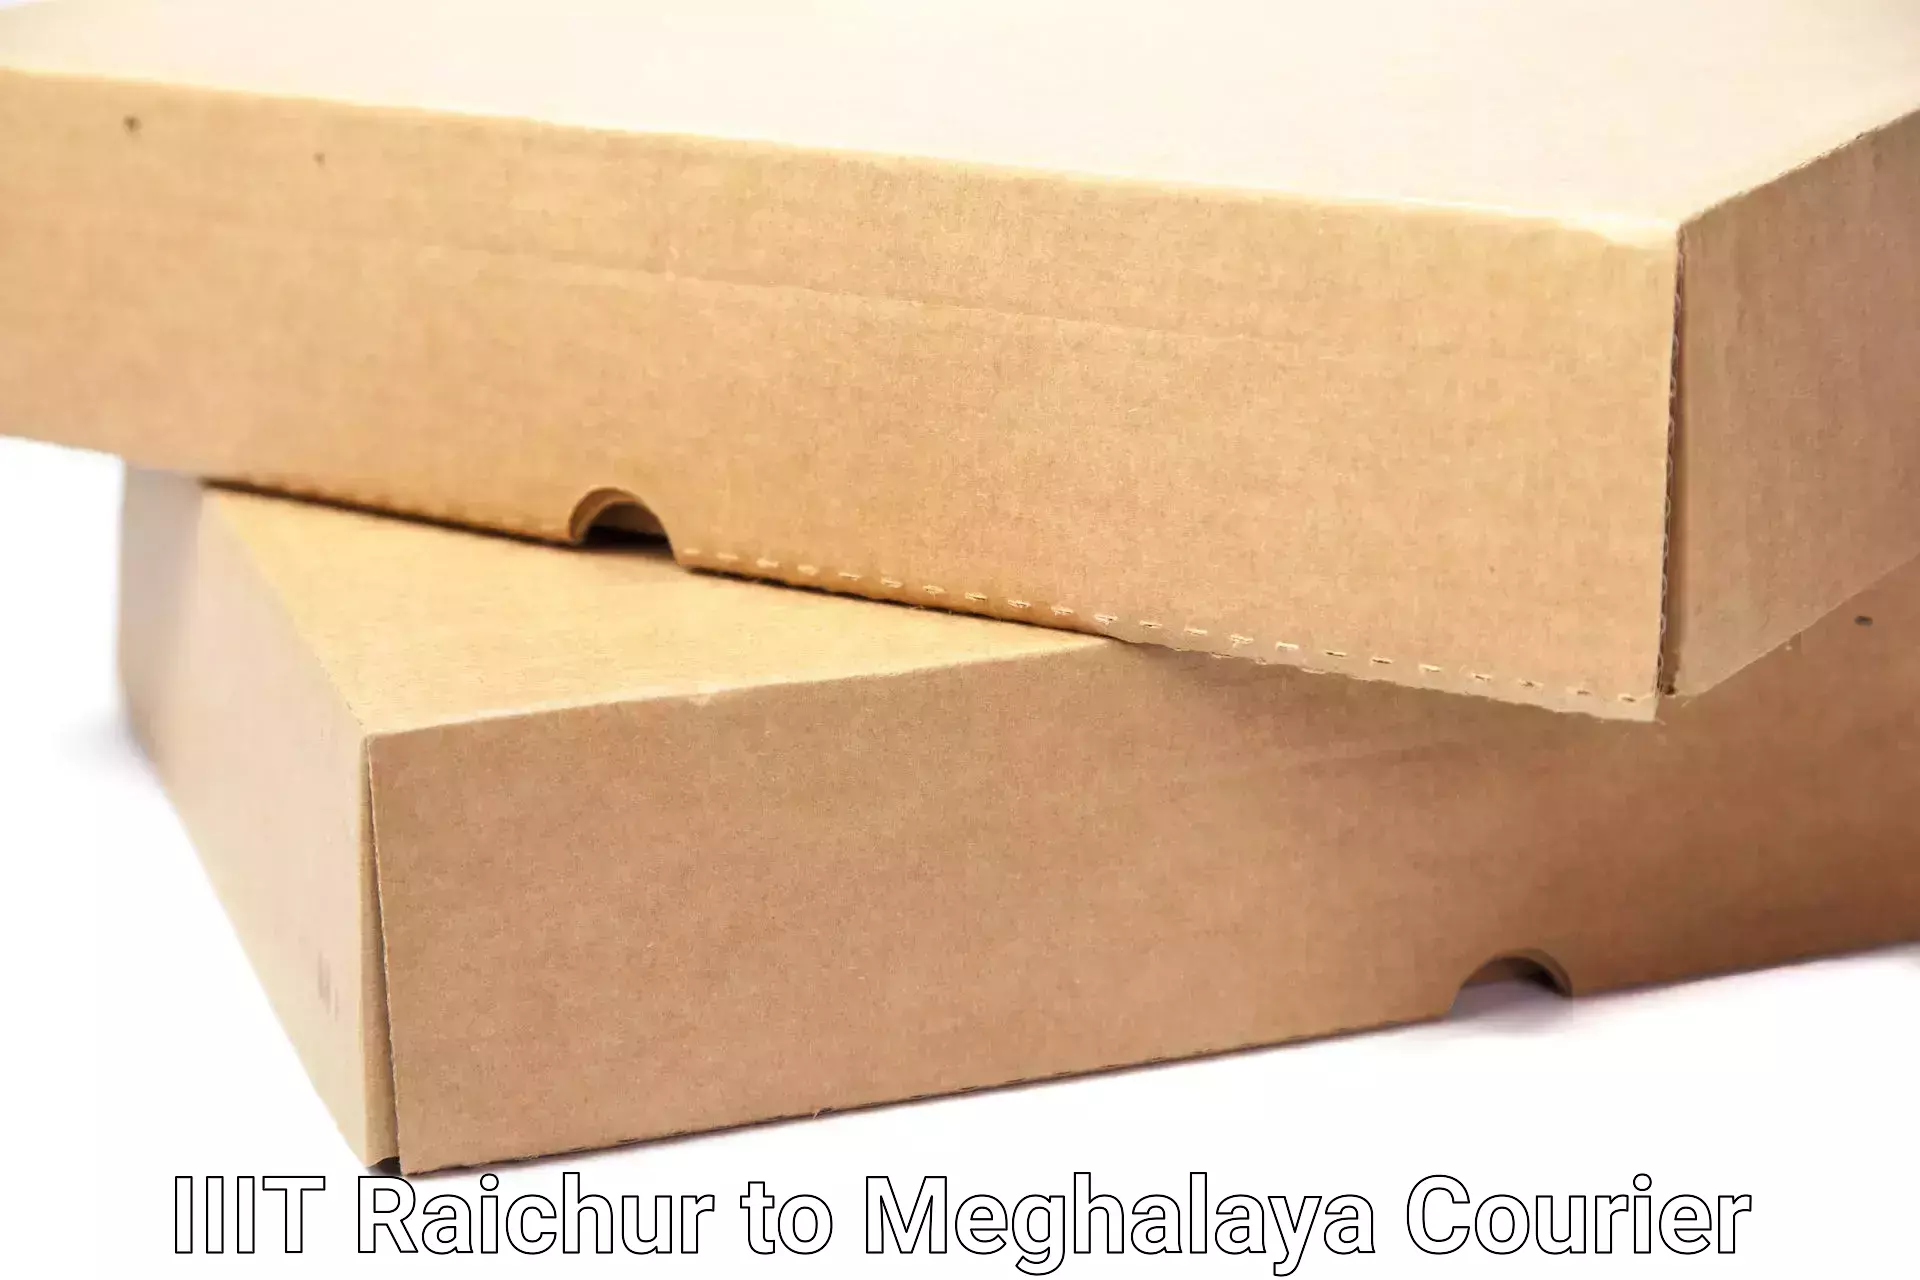 Quality relocation assistance in IIIT Raichur to East Khasi Hills